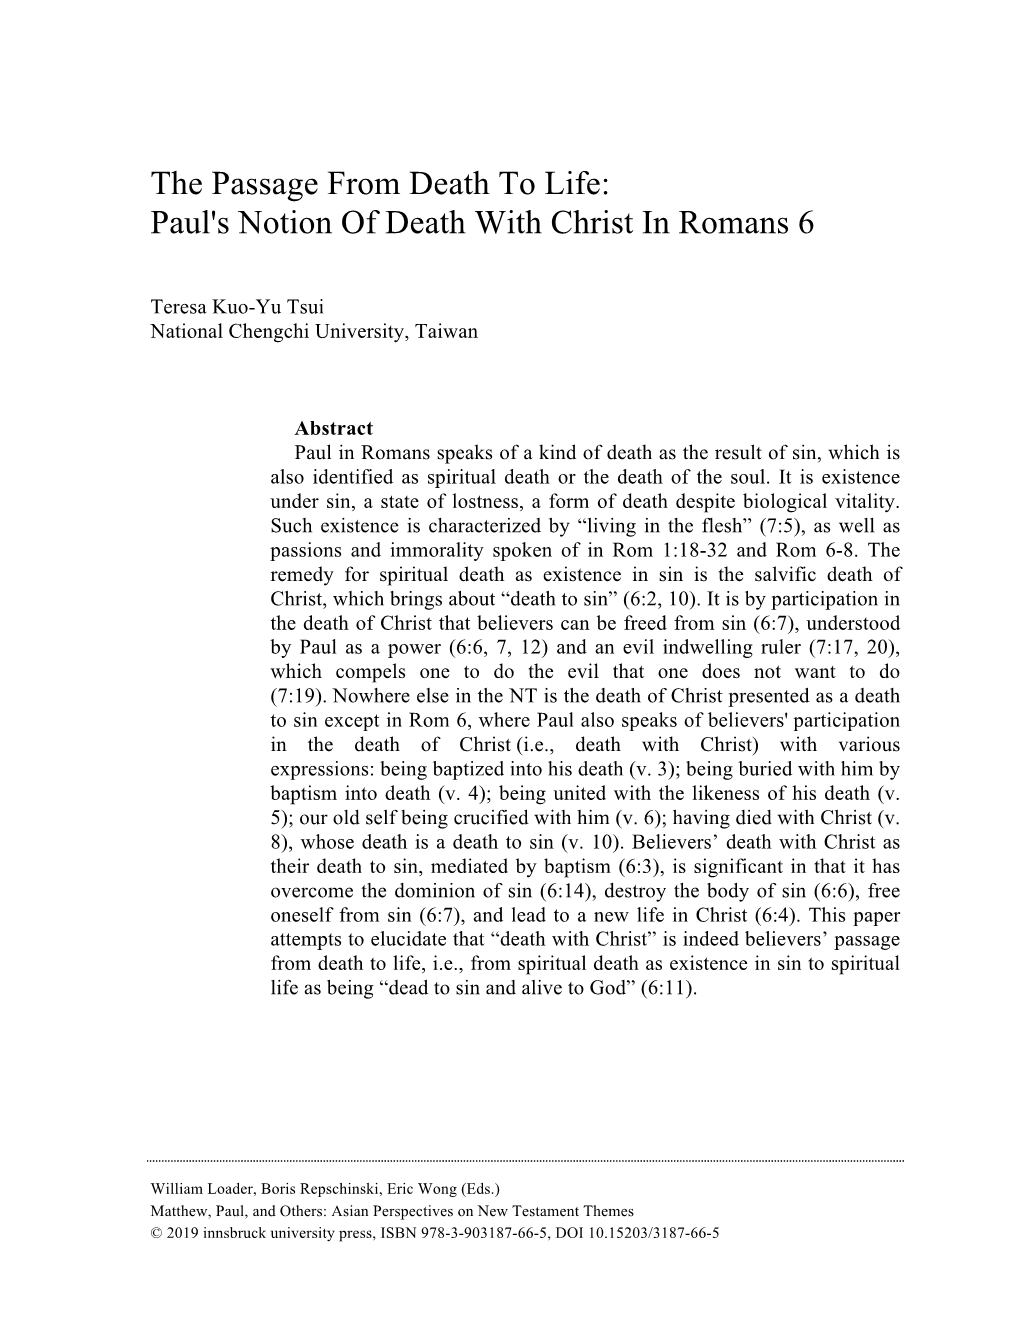 Paul's Notion of Death with Christ in Romans 6